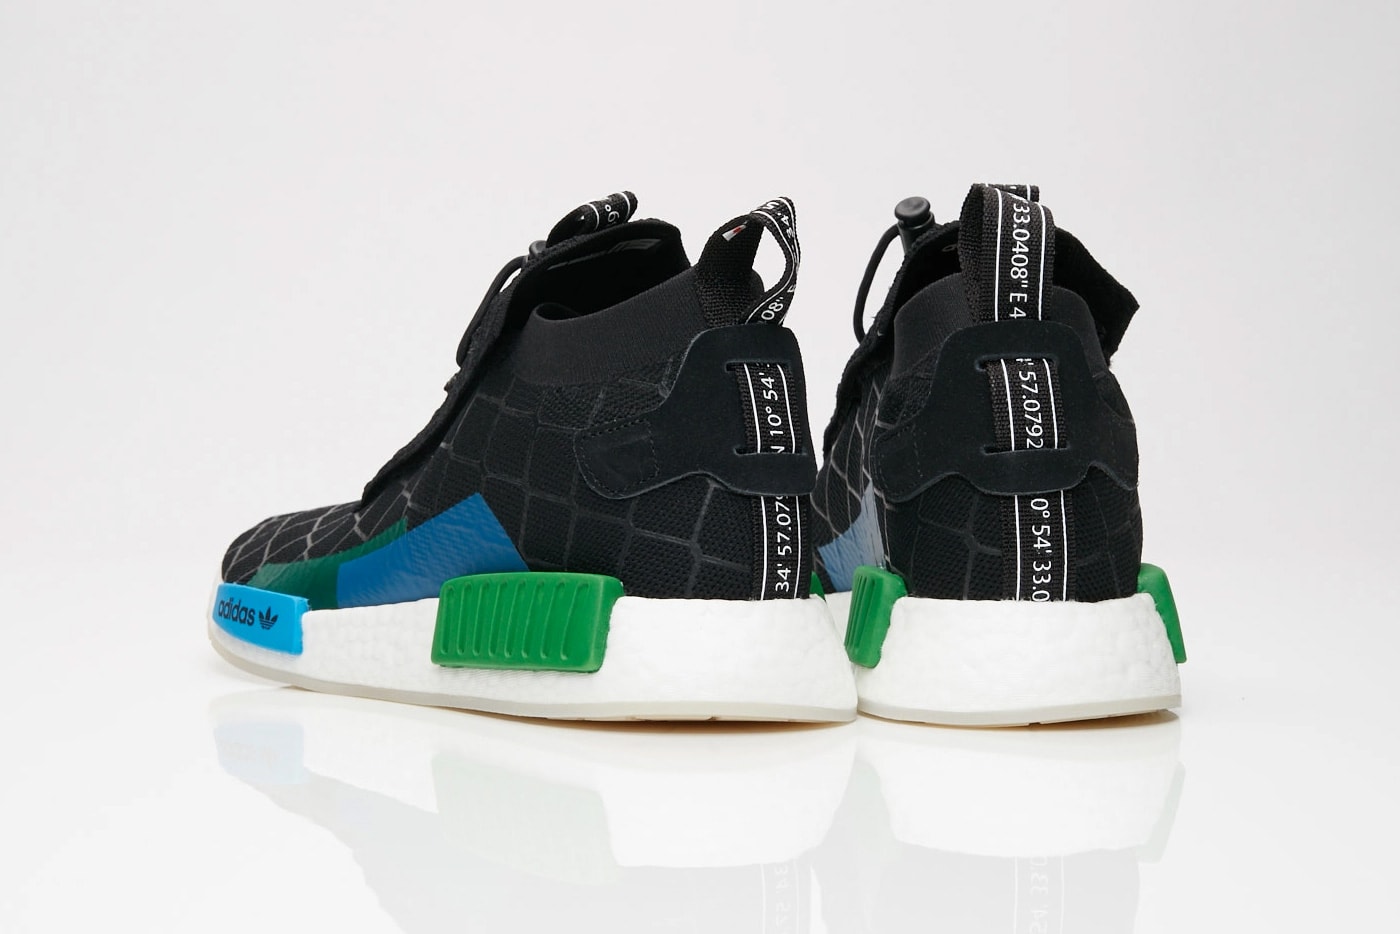 mita sneakers adidas Consortium NMD_TS1 Cages & Coordinates sneaker collection Closer Look release date